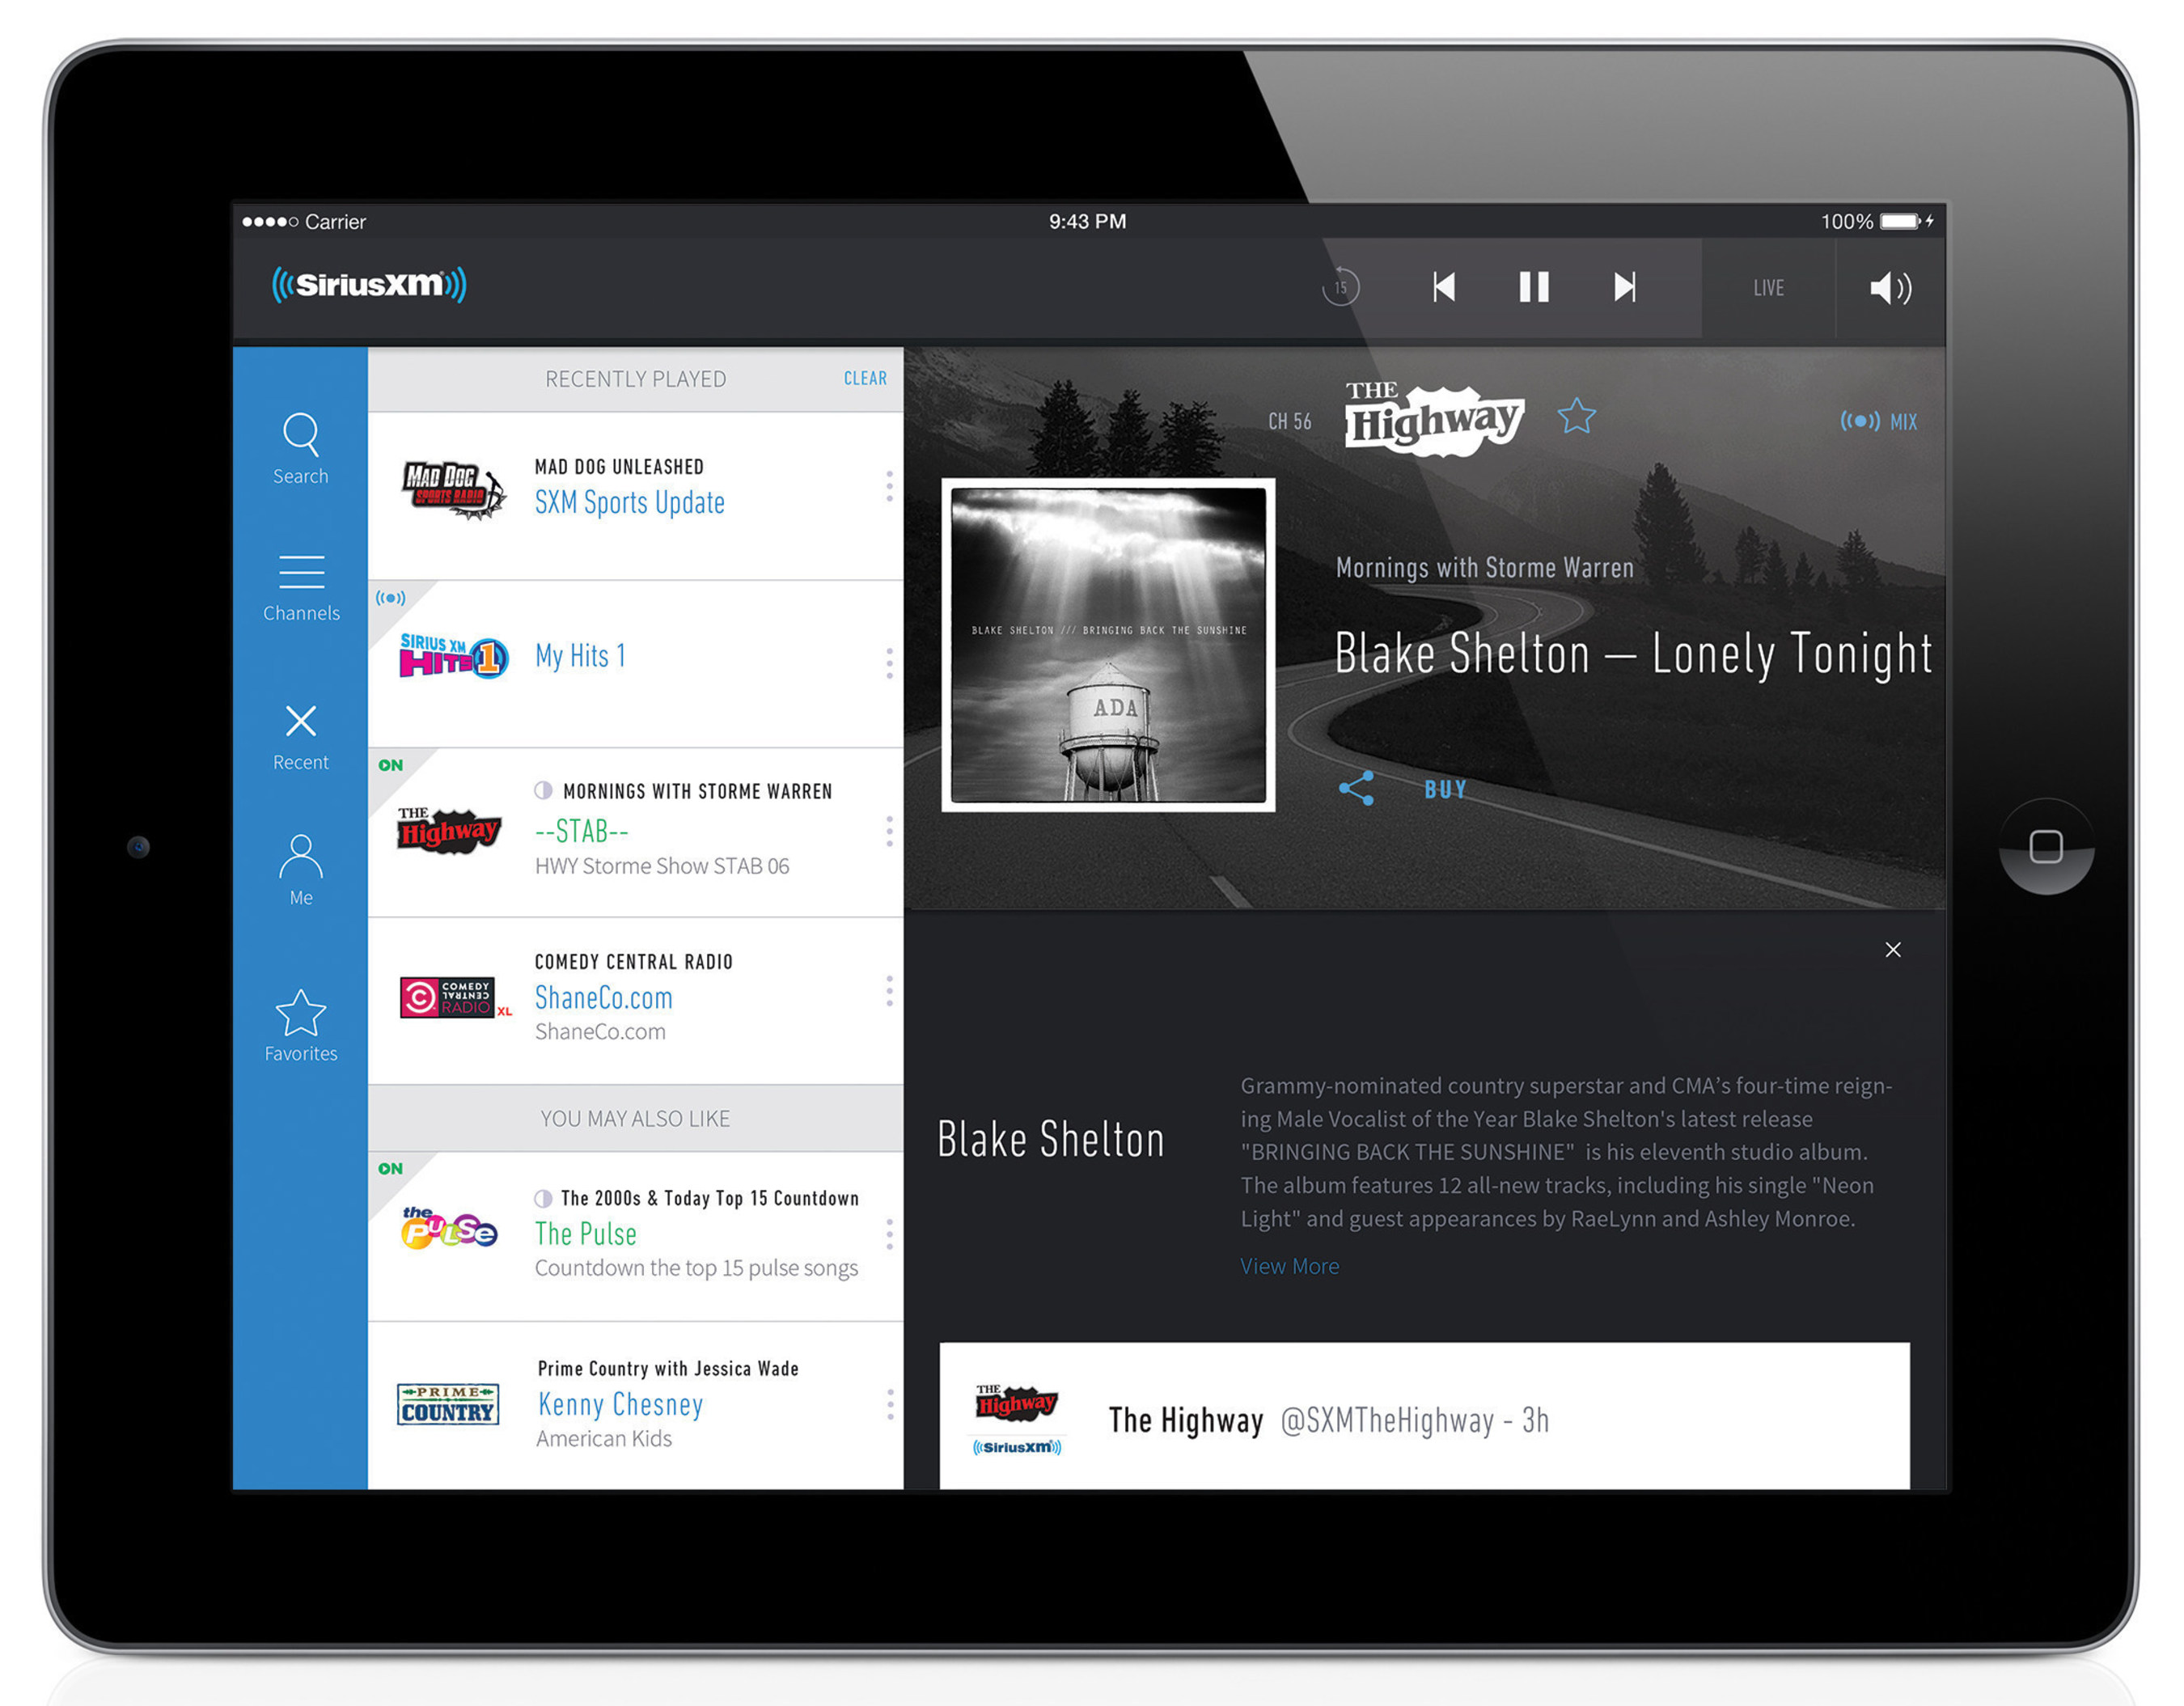 SiriusXM: Listen Your Way Live, On Demand, or Personalized